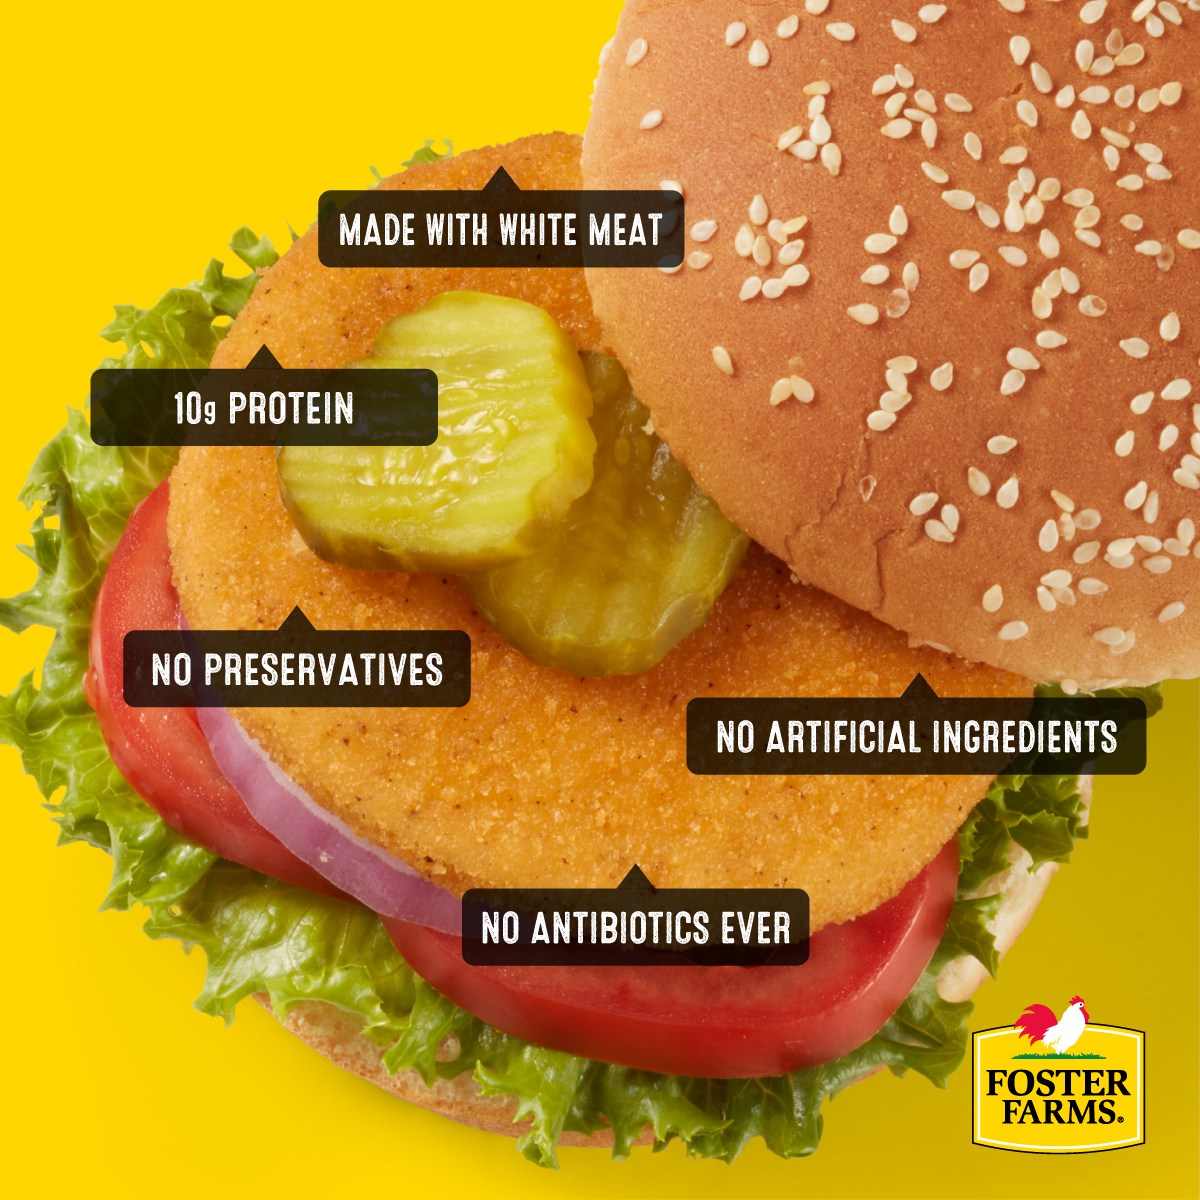 Tag someone who will love our chicken patties!

#fosterfarms #chicken #chickenpatties #patties #chickensandwich #tagafriend #anatomy #food #foodie #foodstagram